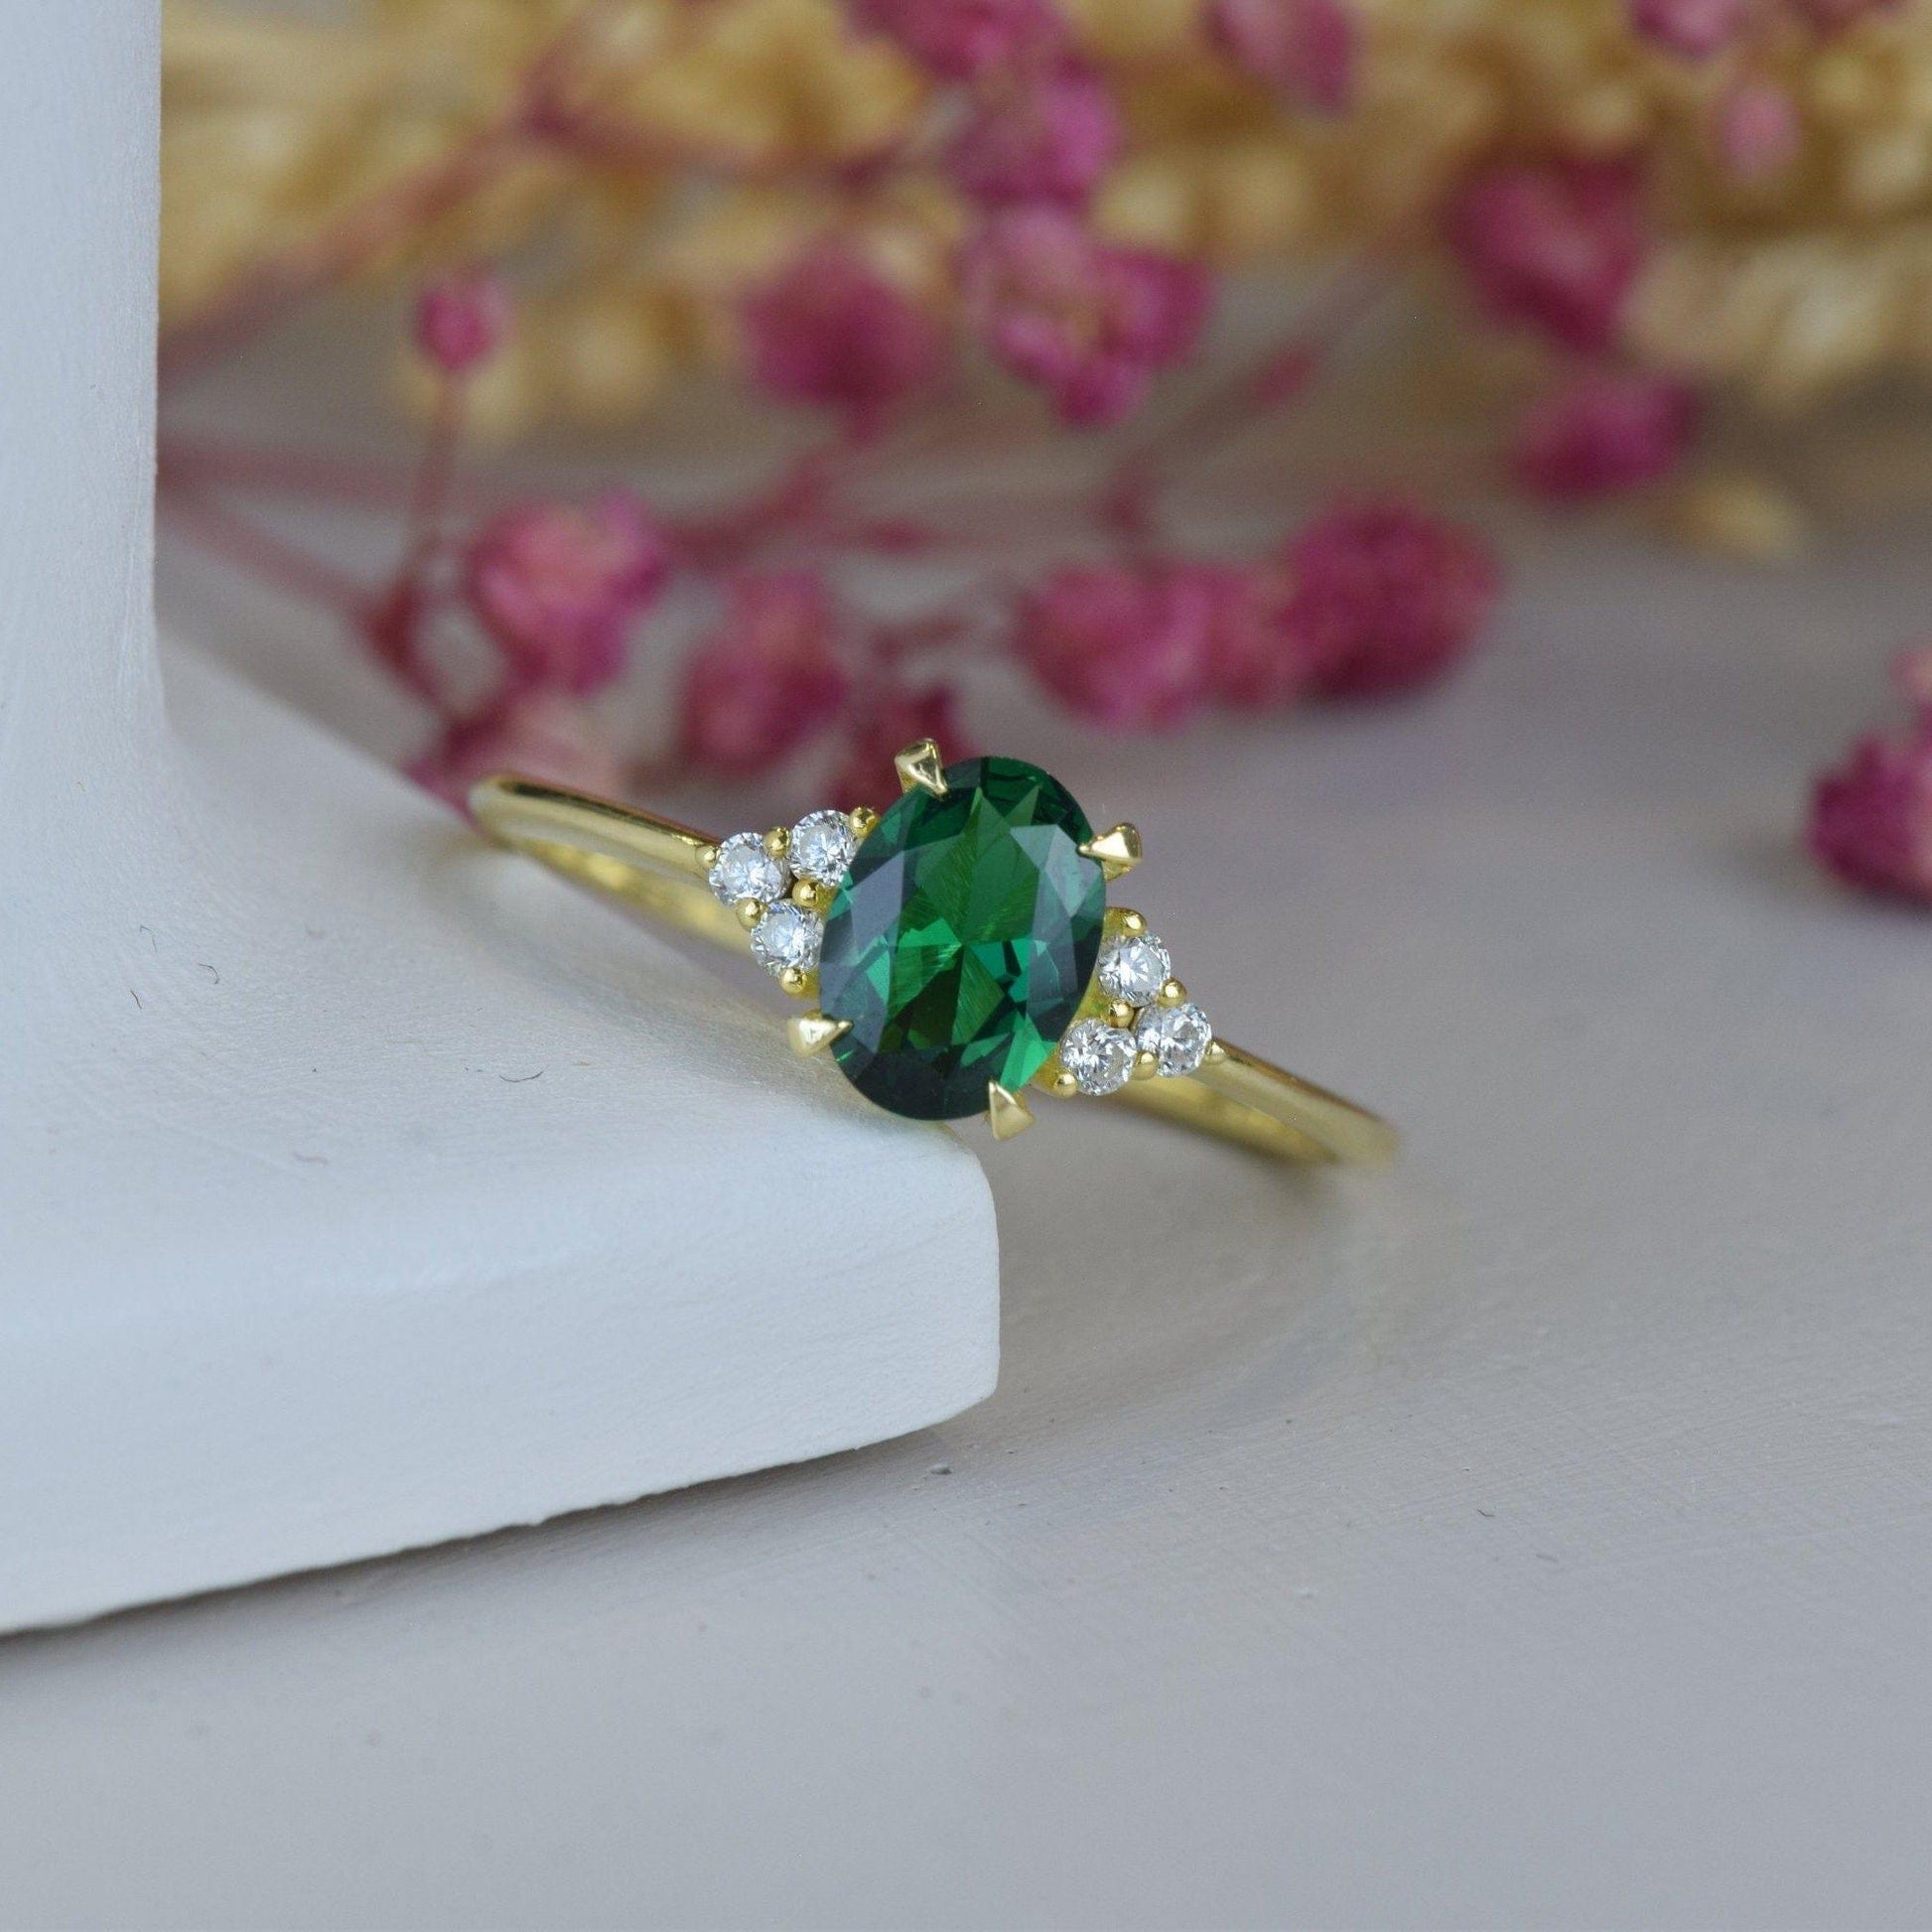 Oval Cut Emerald Gold Engagement Dainty Emerald Anniversary Ring Gift For Her - JBR Jeweler